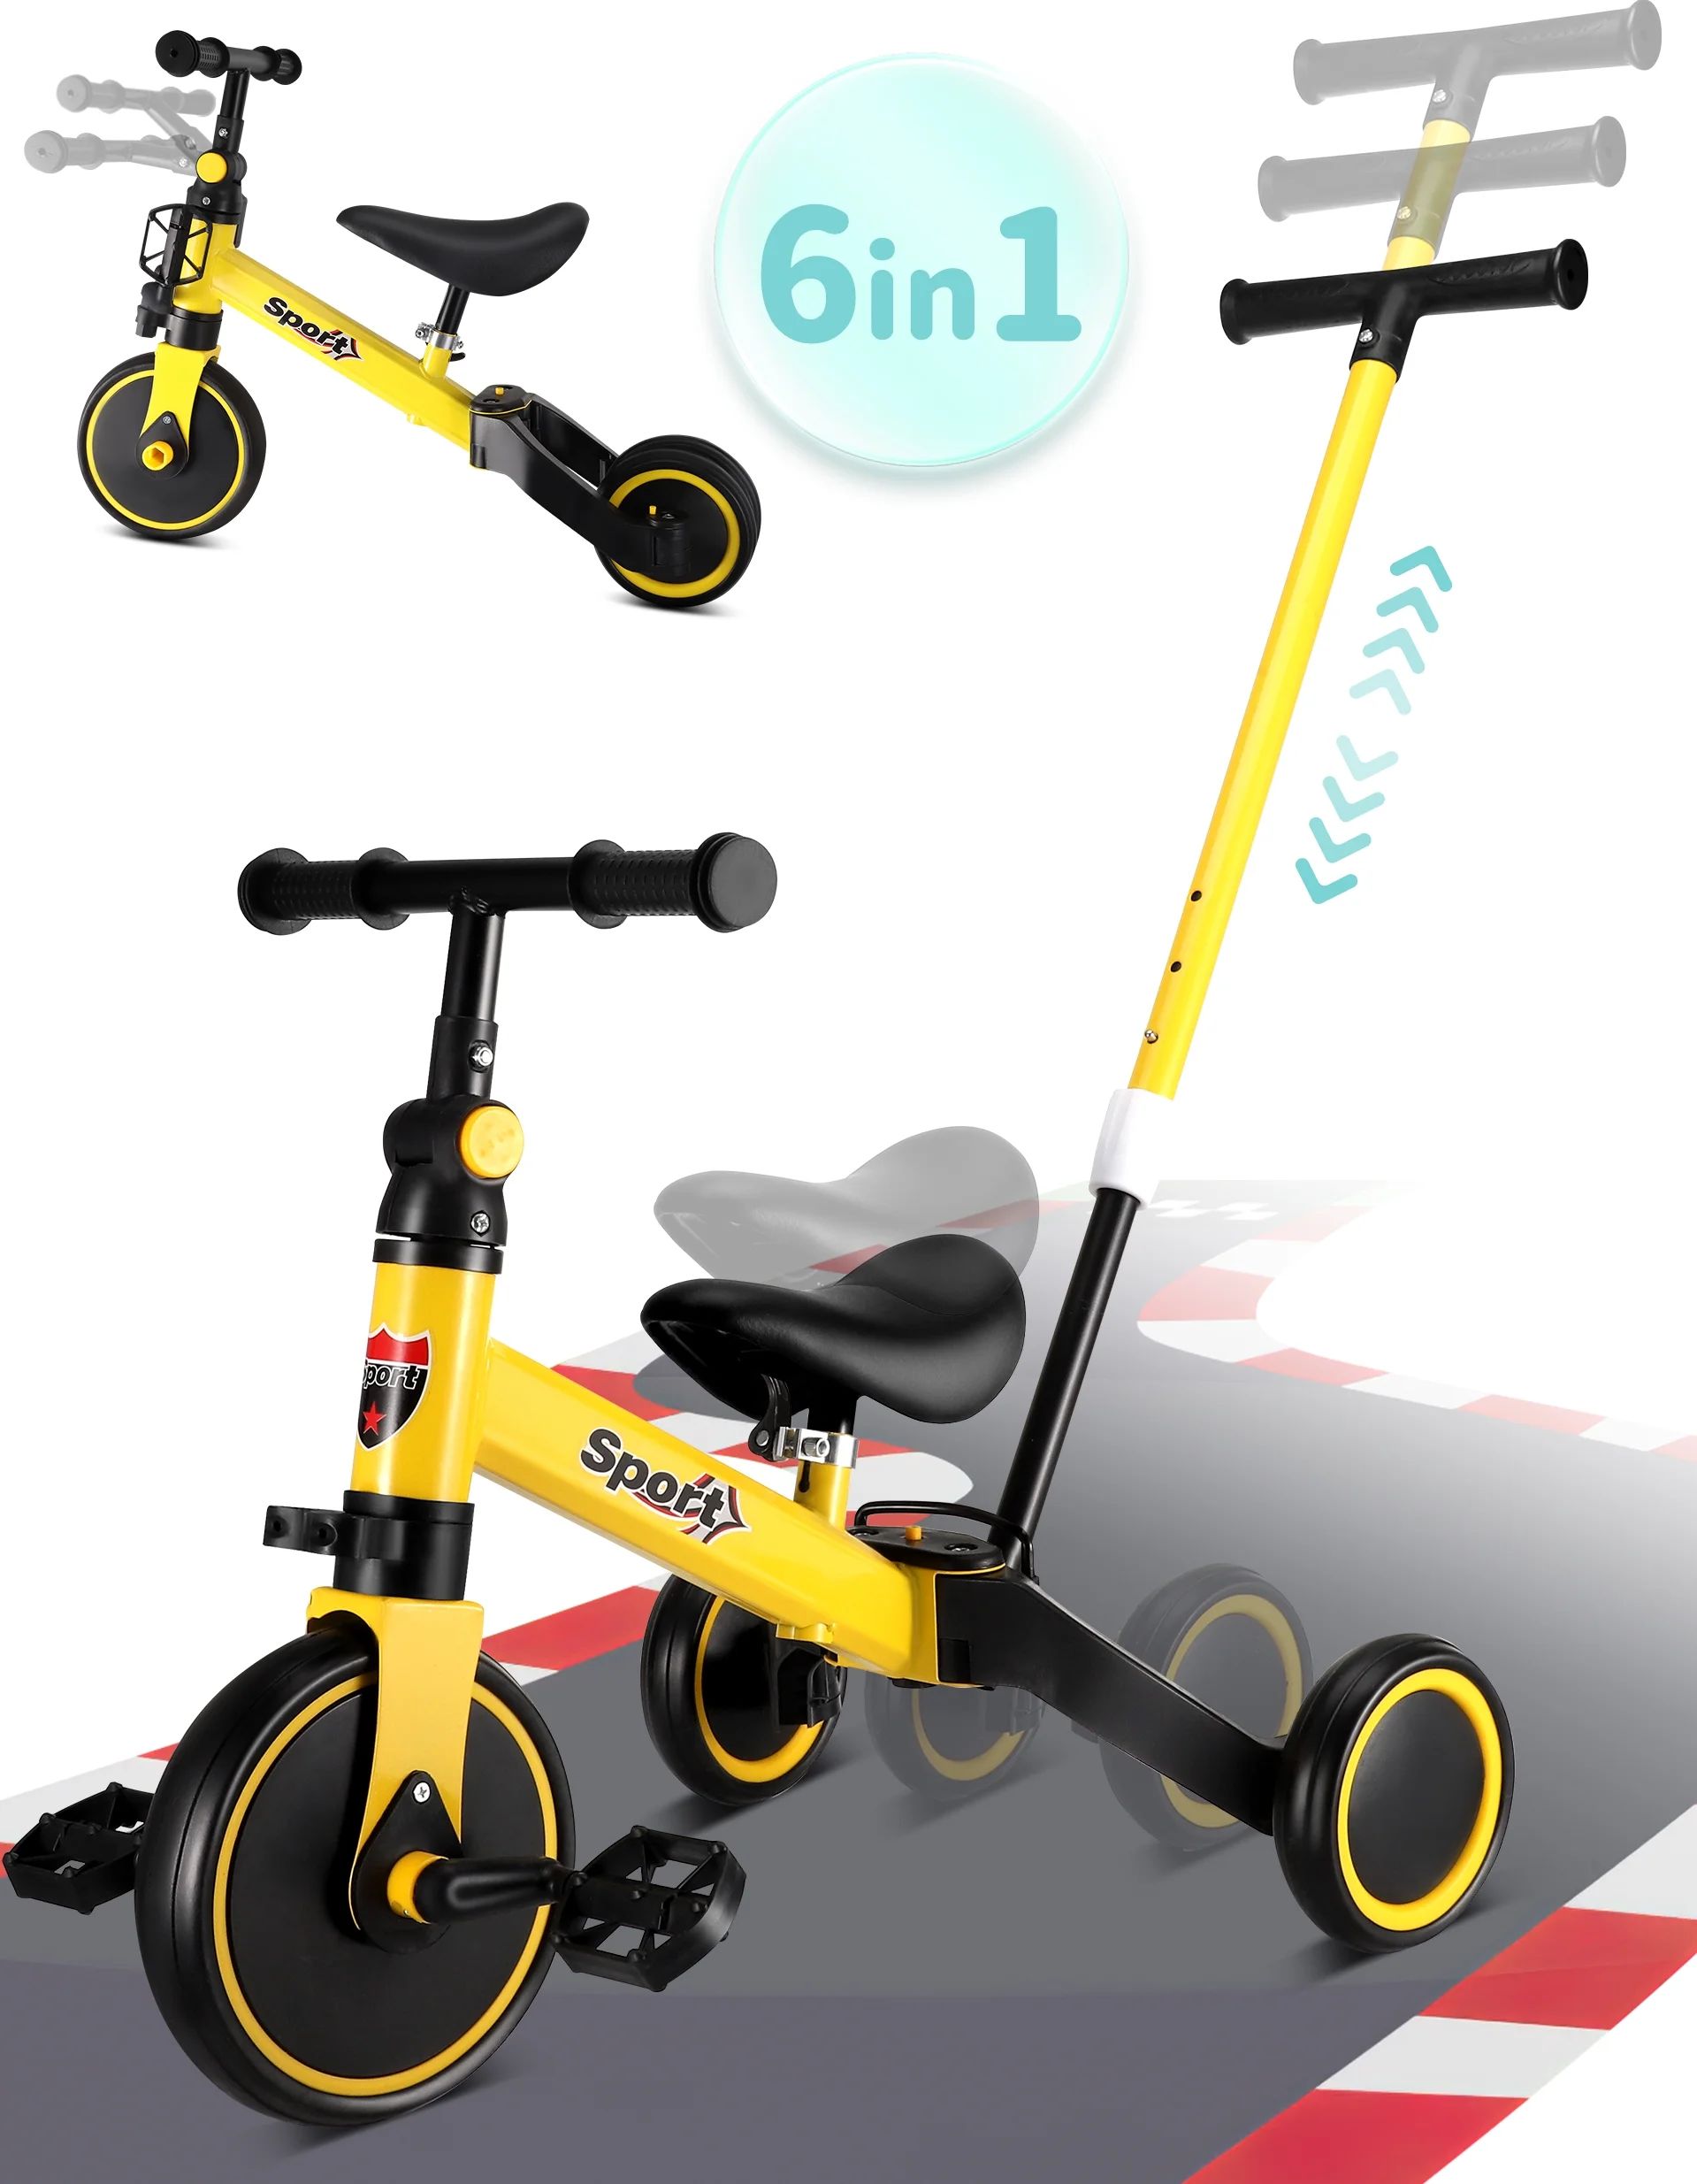 RELOIVE 6 in 1 Kids Tricycle for 1-5 Years Old,Toddler Bike Kids Trike for Balance Training,Baby ... | Walmart (US)